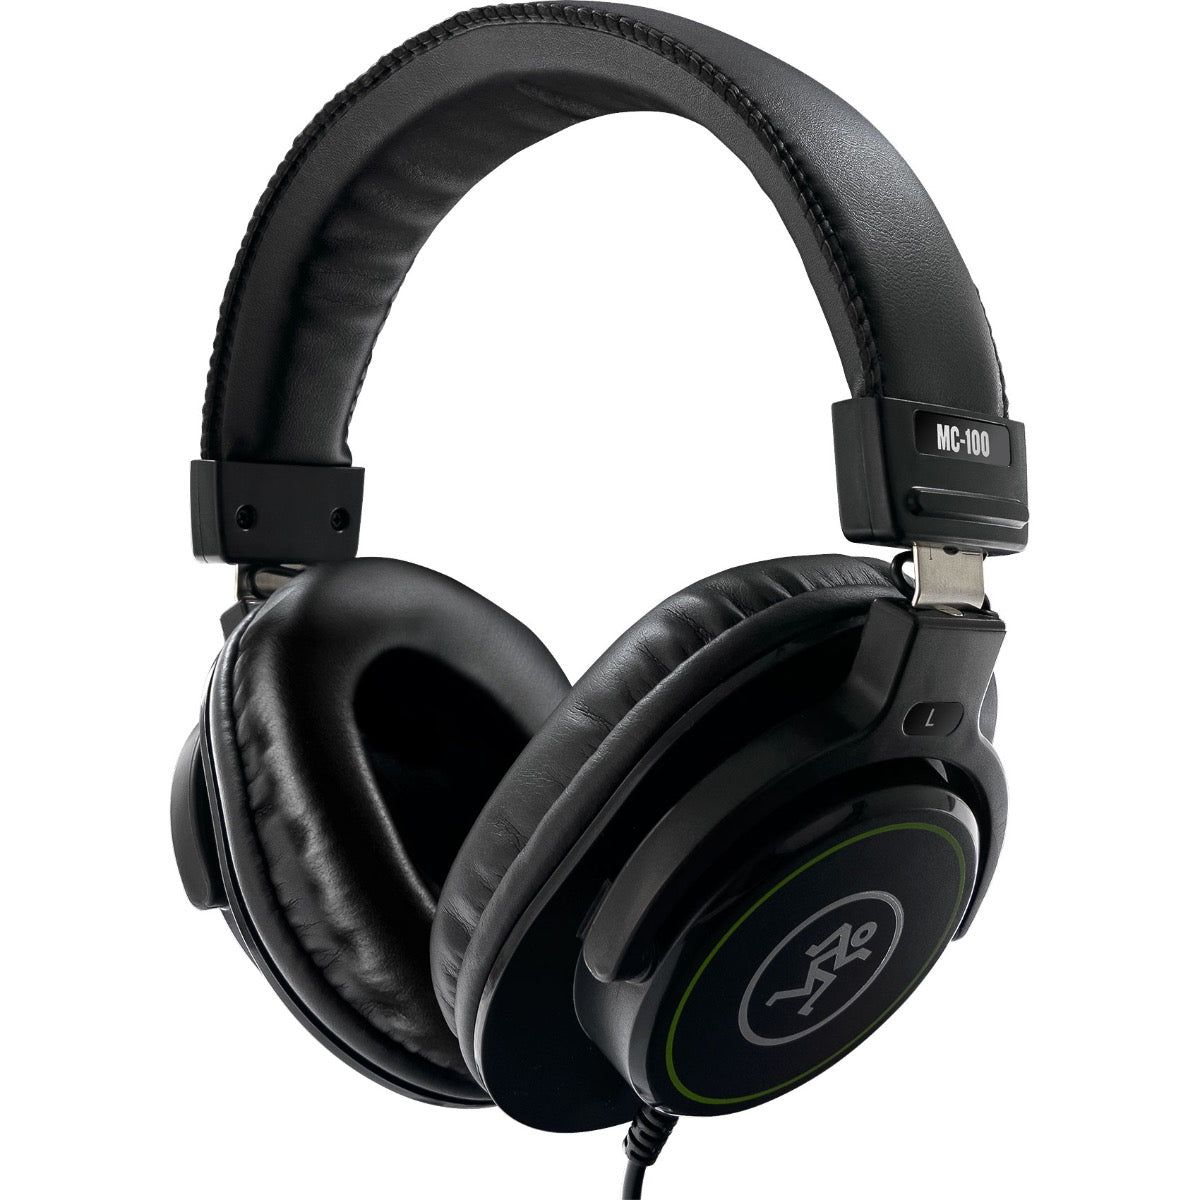 Perspective view of Mackie MC-100 headphones showing front and right side